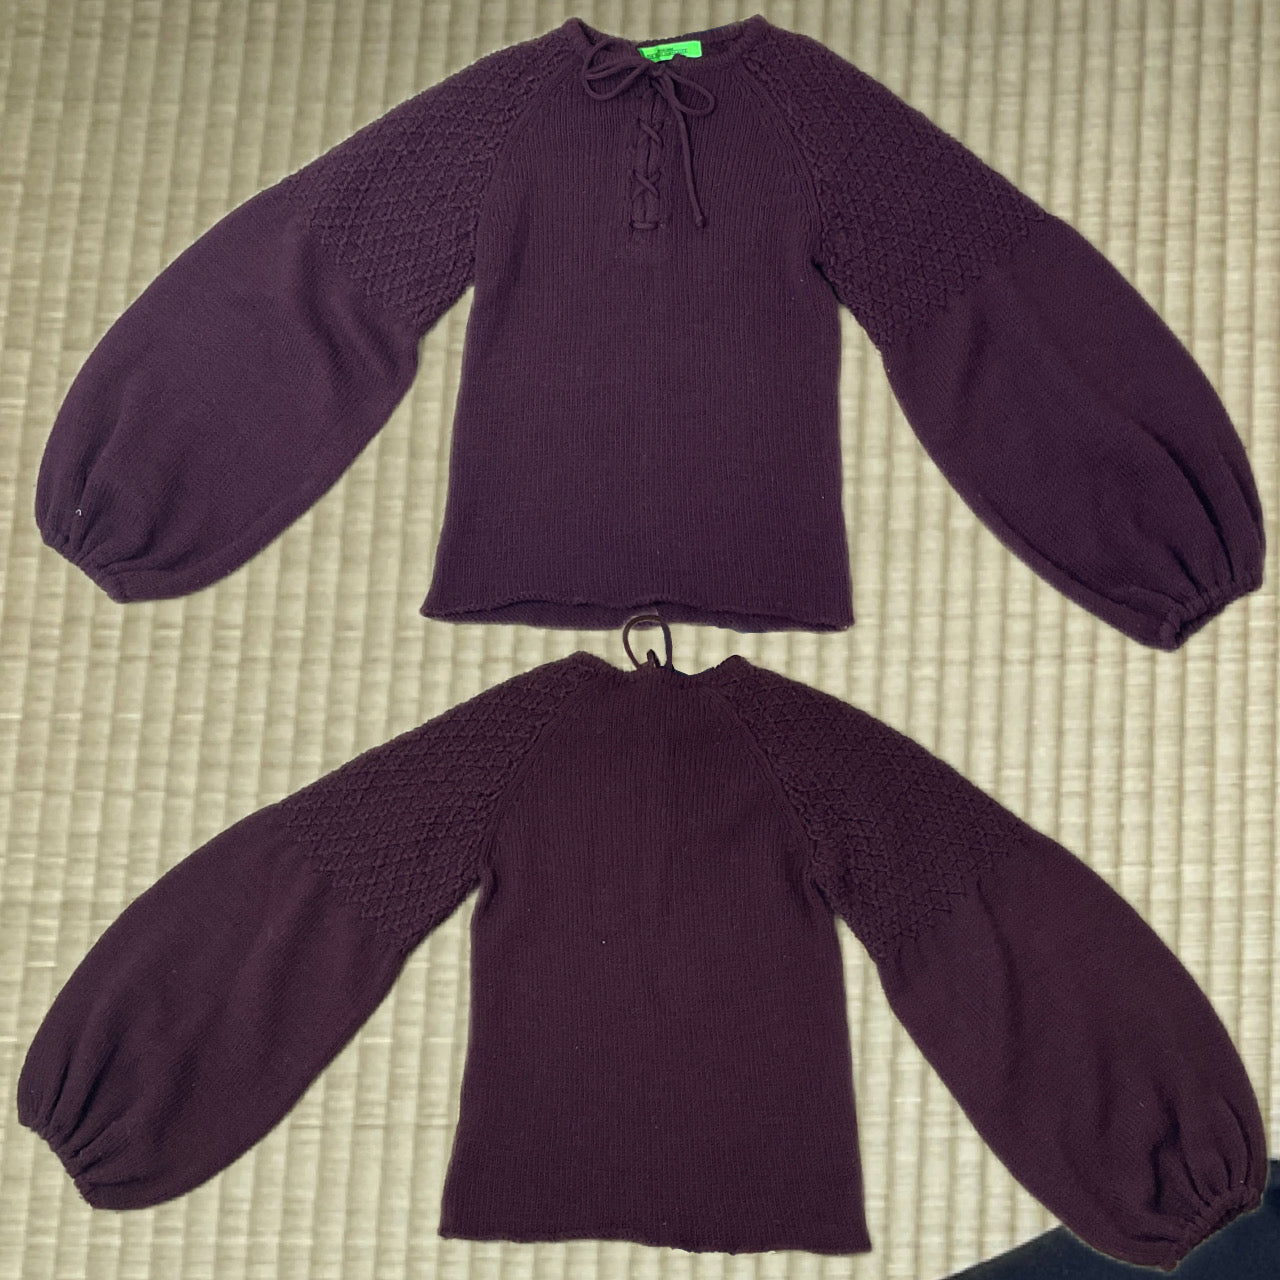 Zucca knit pullover